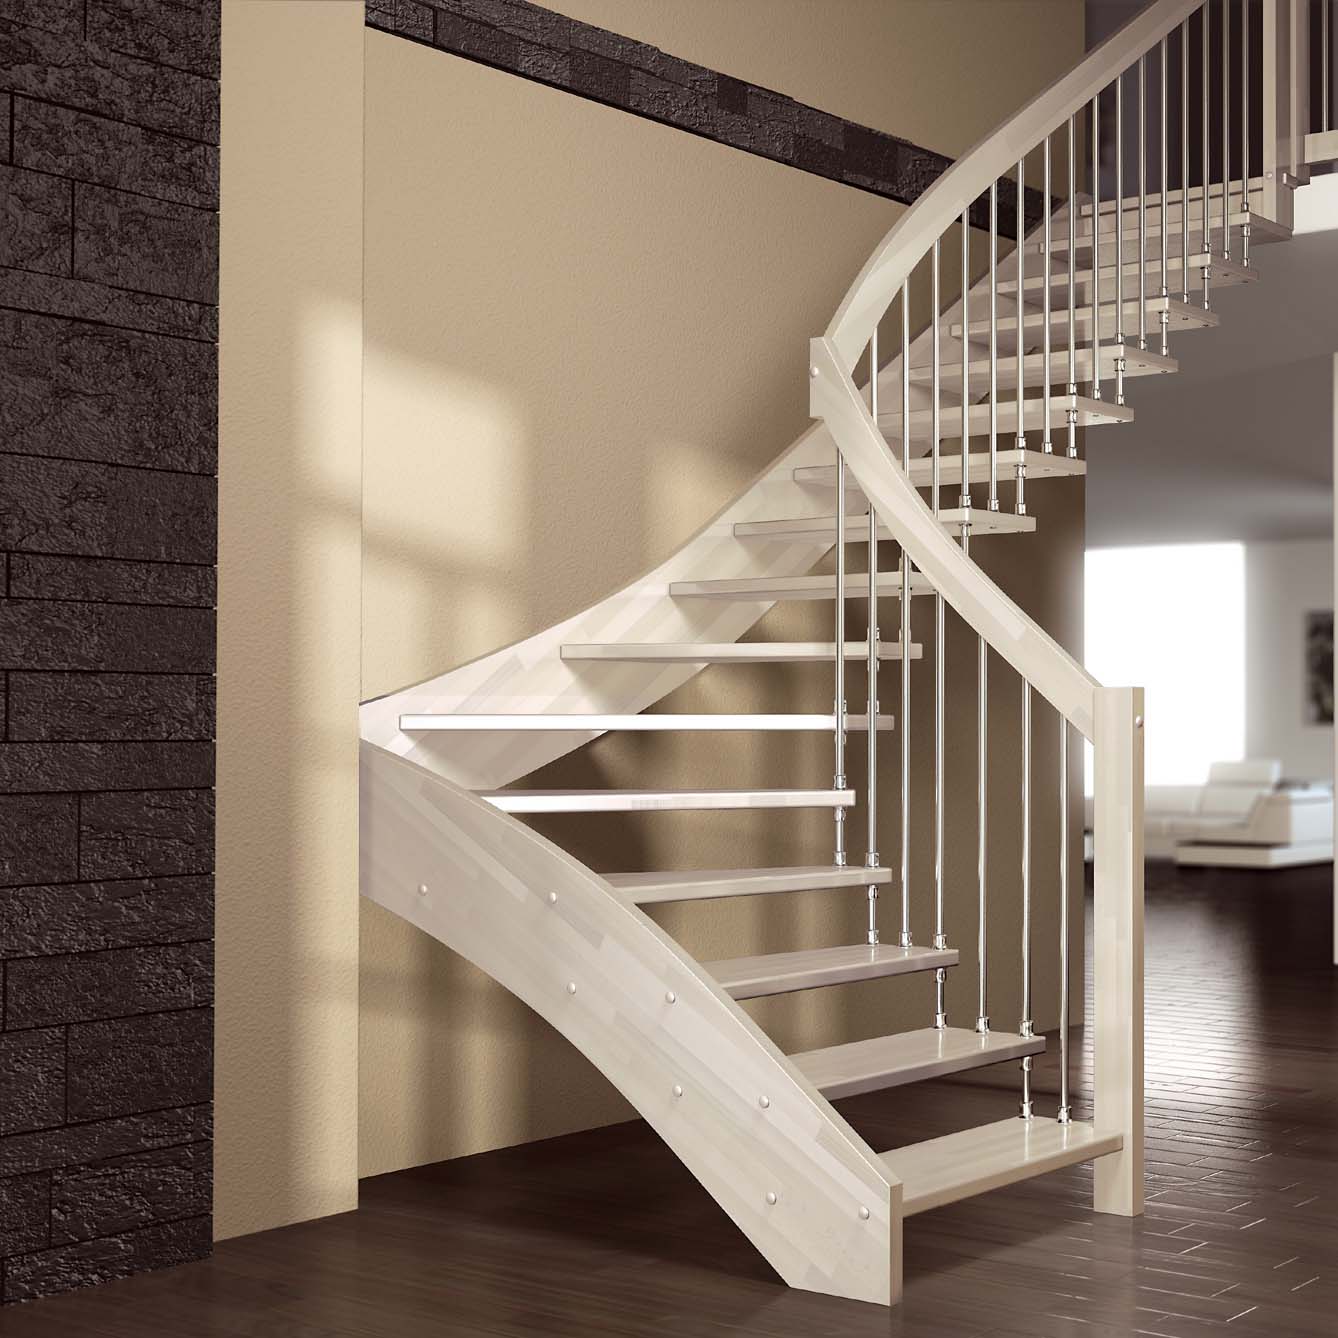 The best models of stairs to a country house or apartment on the second floor